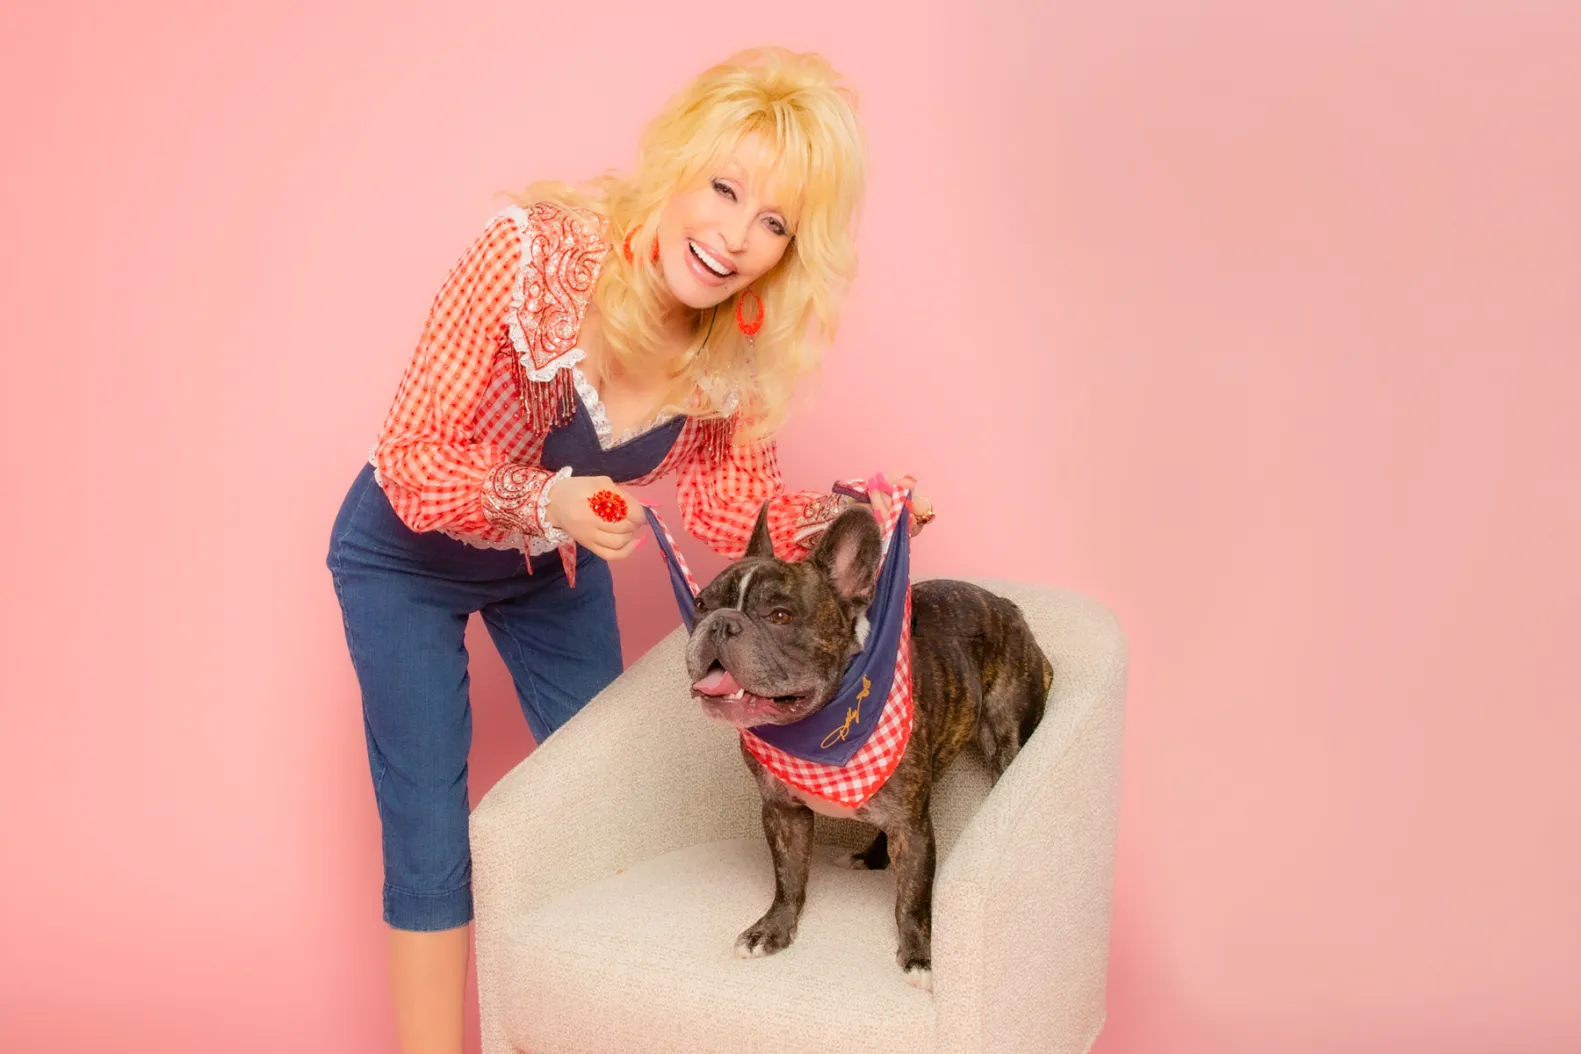 Dolly Parton's Pet Gala: Music's Biggest Hitmakers Performing Parton Songs with Pets - Feb. 21